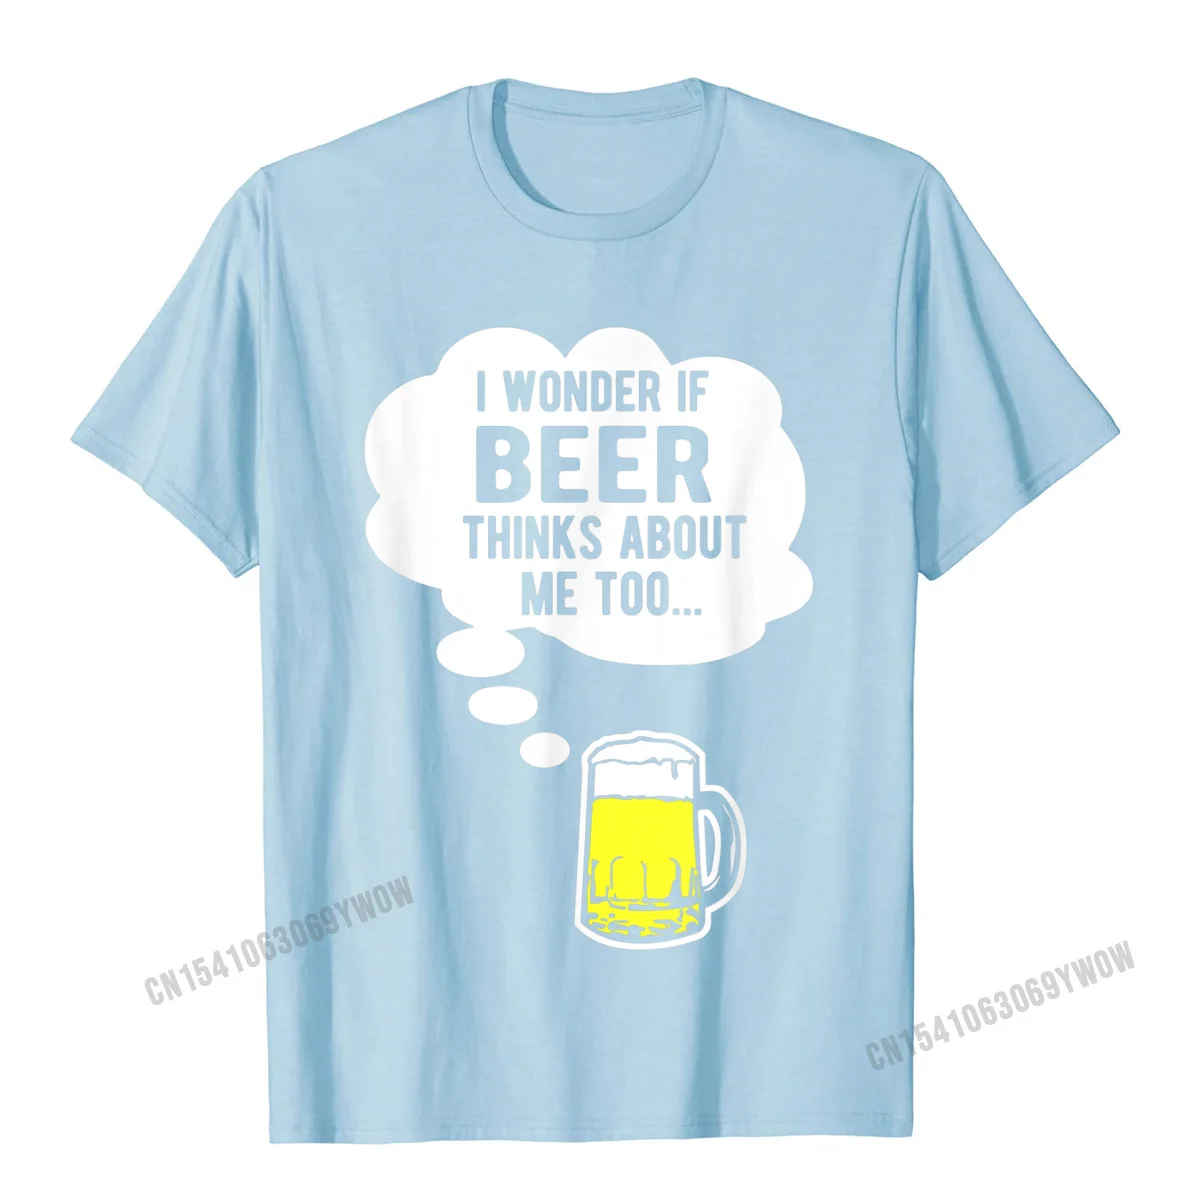 3D Printed Top T-shirts for Men Summer Summer Fall Tops T Shirt Short Sleeve Coupons Fashionable Tees Round Neck 100% Cotton I wonder if beer thinks about me too t-shirt T-Shirt__205 light